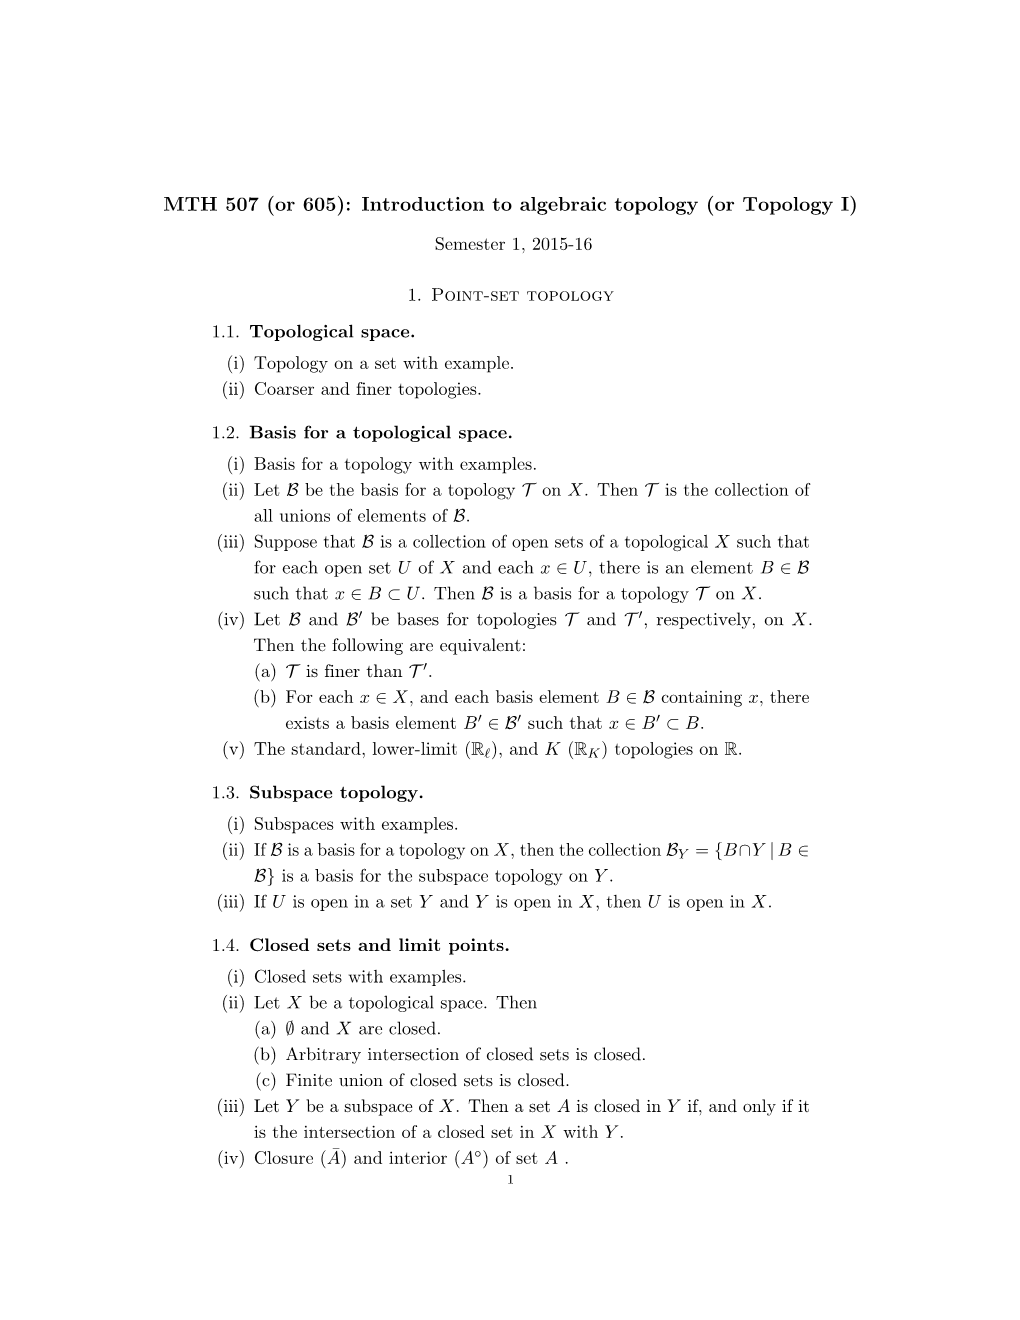 MTH 507 (Or 605): Introduction to Algebraic Topology (Or Topology I)